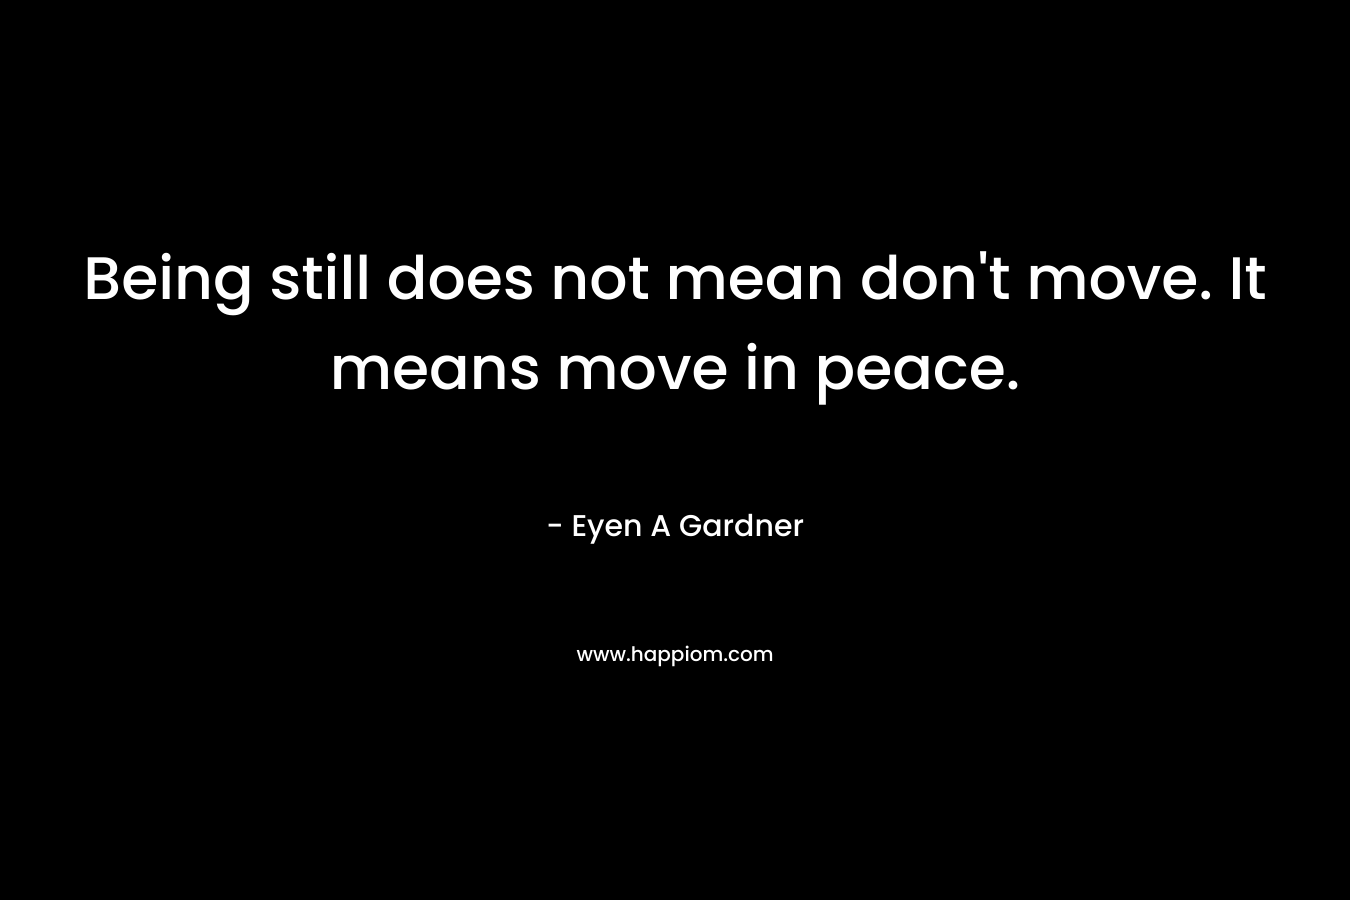 Being still does not mean don't move. It means move in peace.